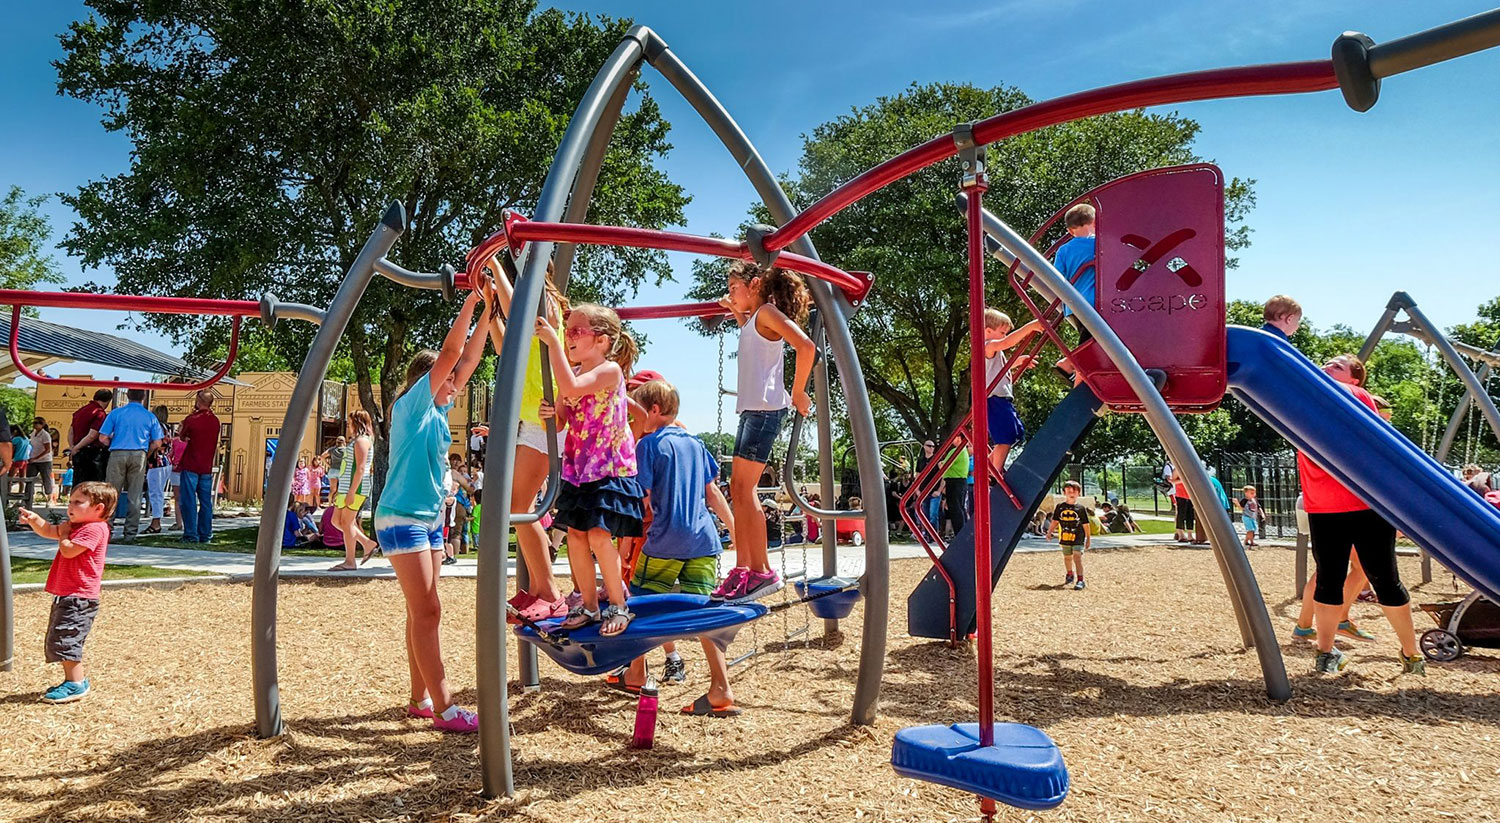 Children playing at the Creative Playscape in Georgetown, TX